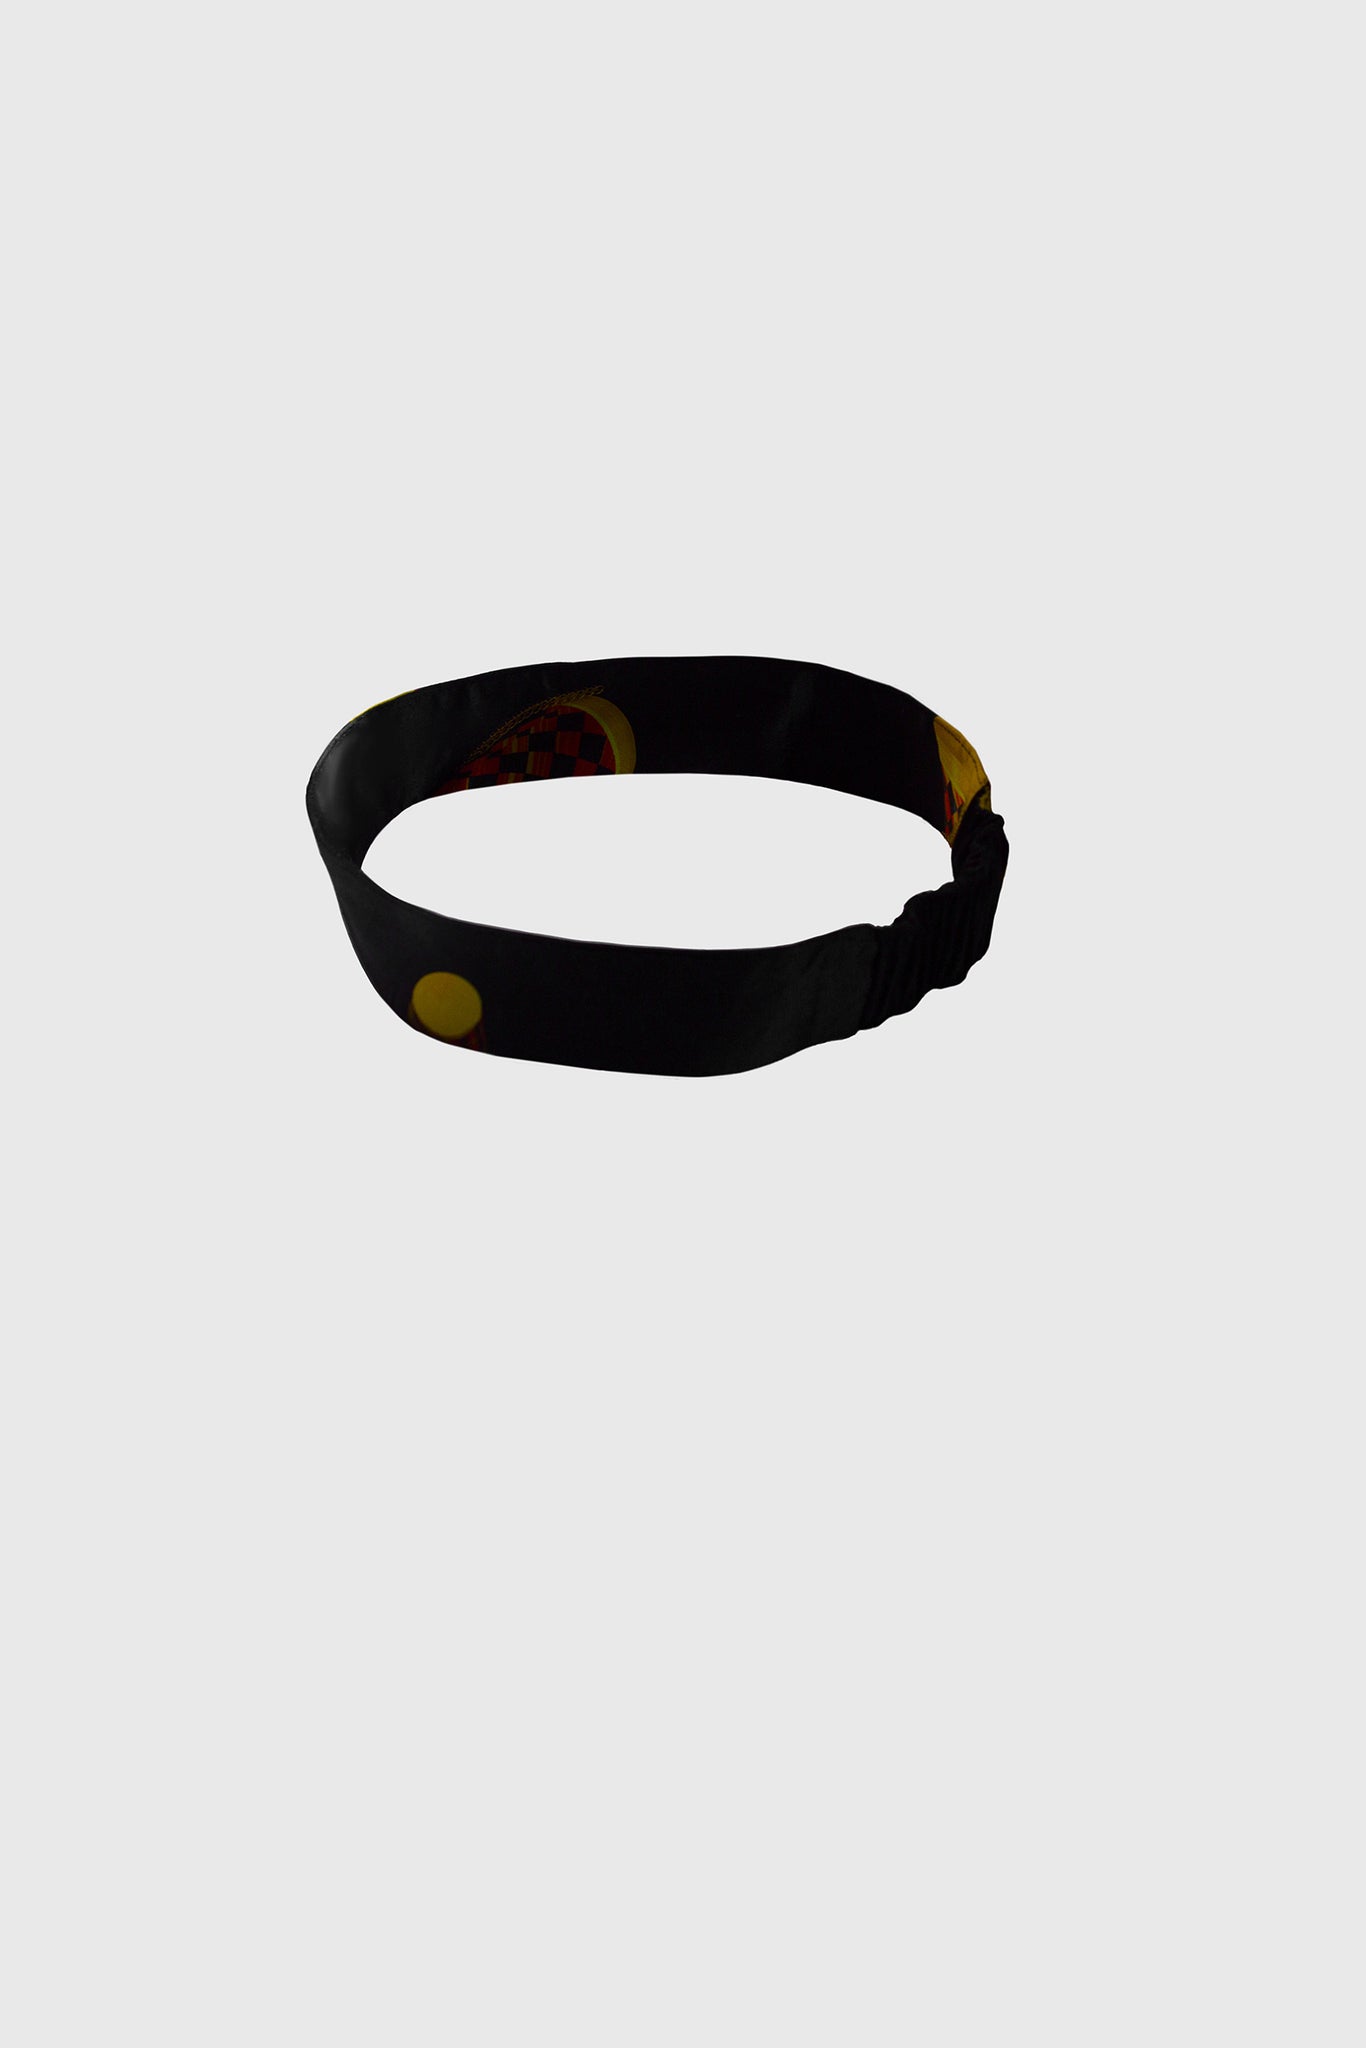 Ruxandra, simple and effective hair band, hold your hair in a fashionable way, classic and timeless, elegant simplicity, golden cylinders printed on black silk